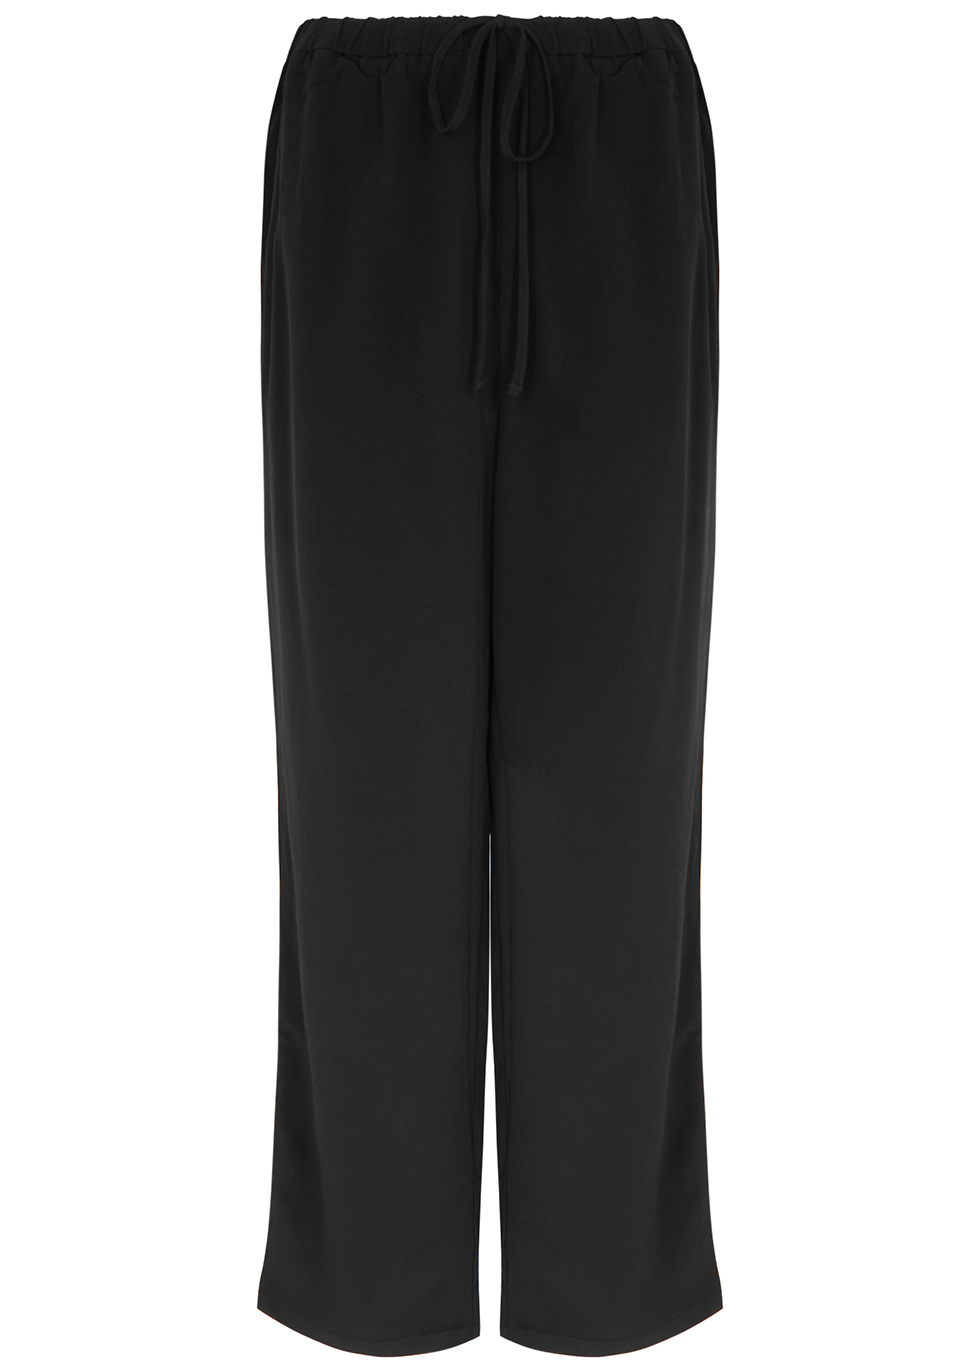 Black stretch-jersey trousers